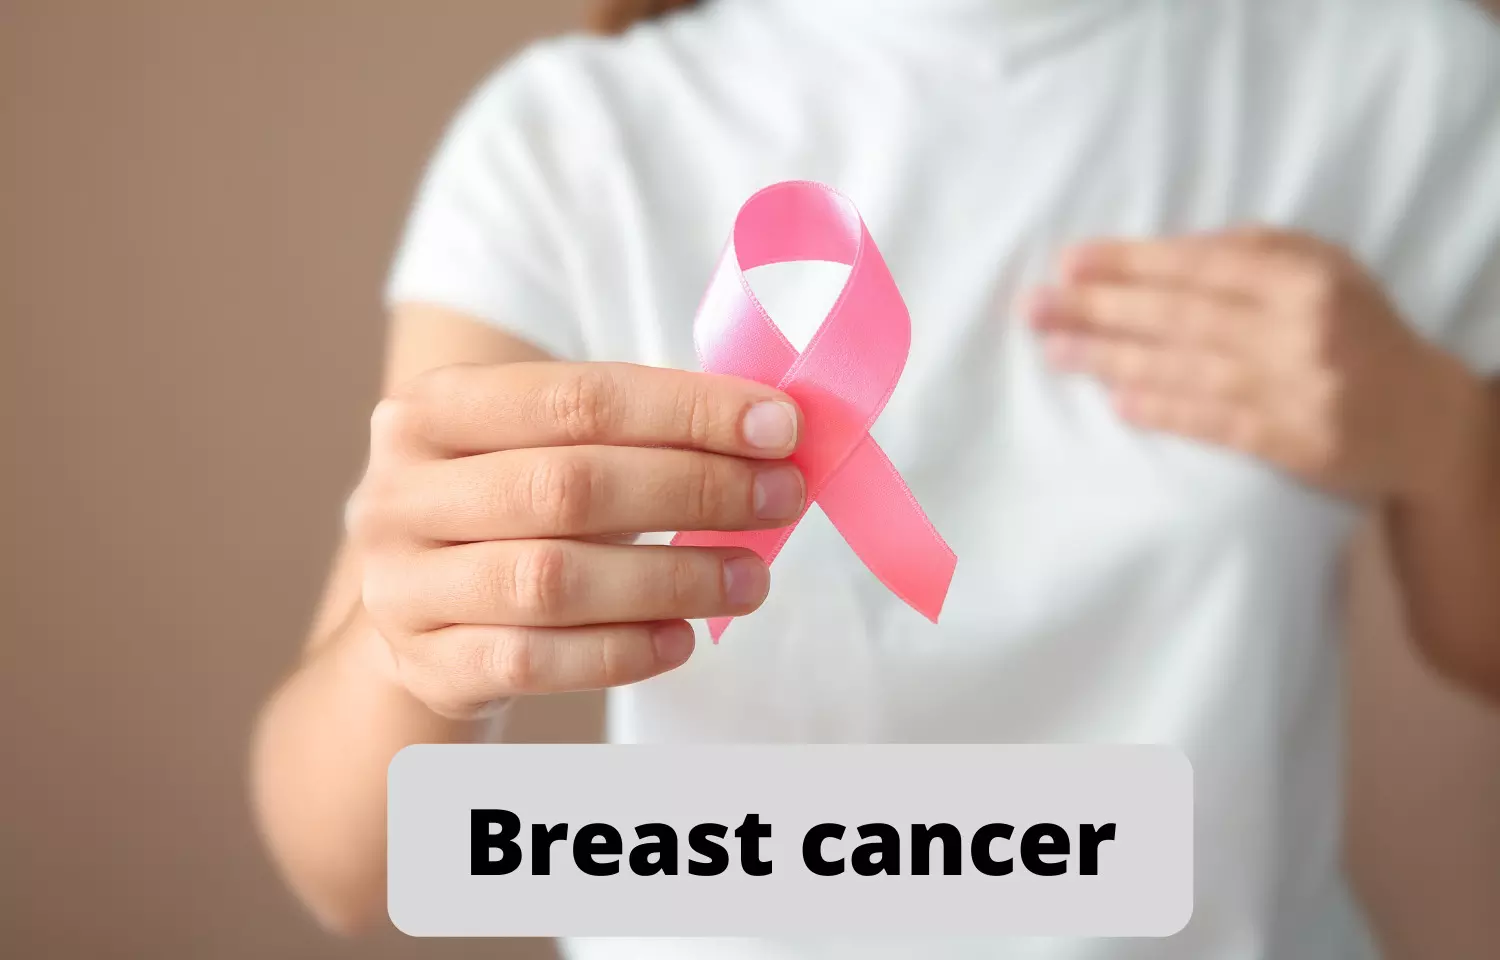 Add on metformin to standard breast cancer treatments fails to improve outcomes